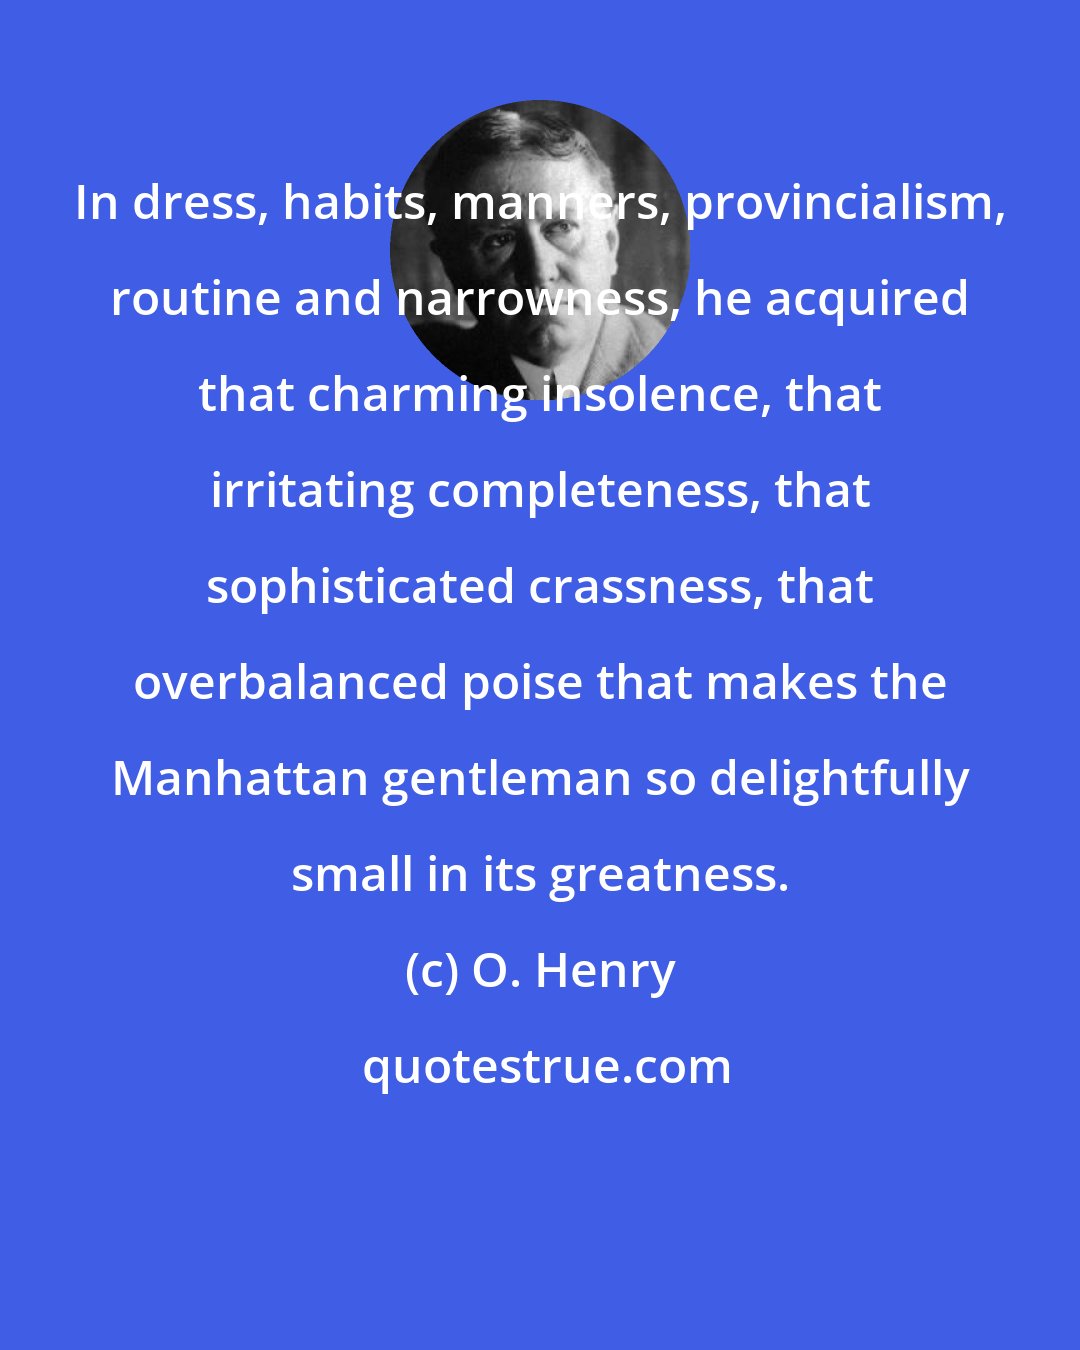 O. Henry: In dress, habits, manners, provincialism, routine and narrowness, he acquired that charming insolence, that irritating completeness, that sophisticated crassness, that overbalanced poise that makes the Manhattan gentleman so delightfully small in its greatness.